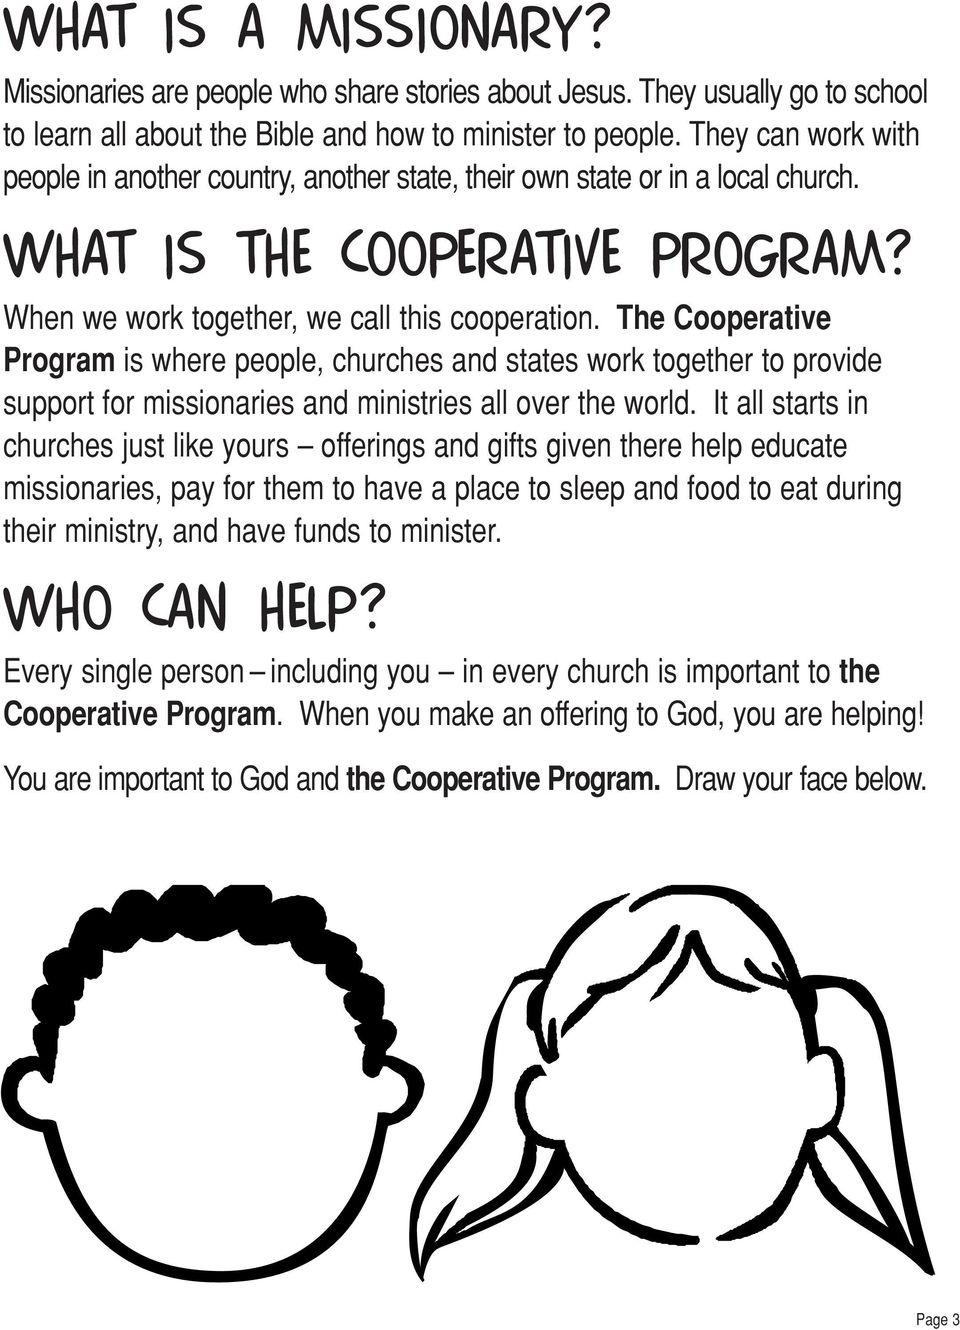 The Cooperative Program is where people, churches and states work together to provide support for missionaries and ministries all over the world.